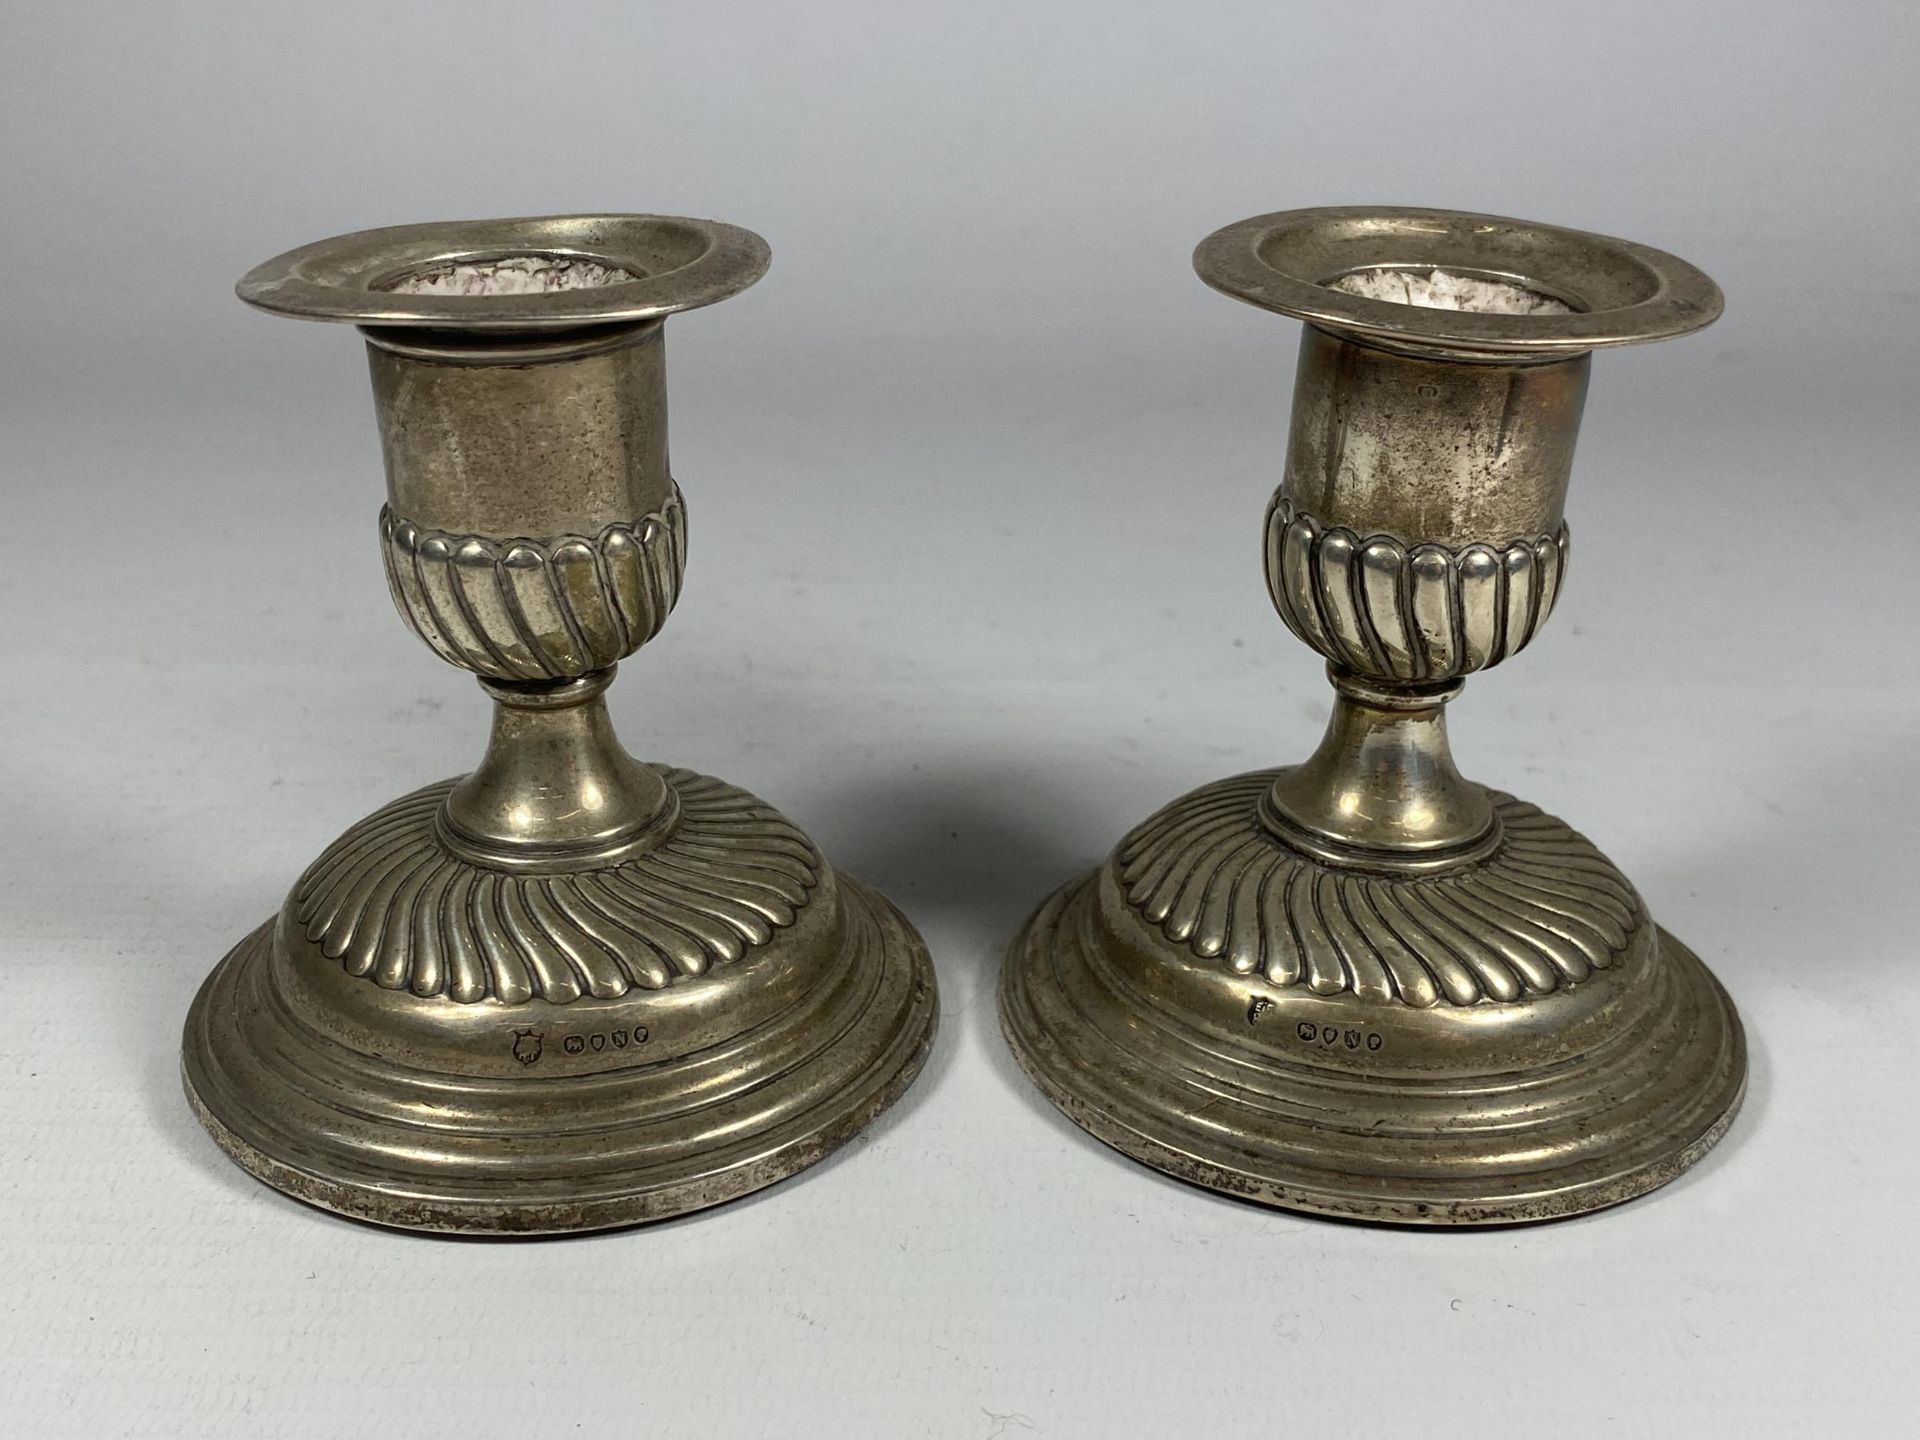 A PAIR OF VICTORIAN HALLMARKED SILVER CANDLESTICKS WITH FLUTED BASE DESIGN, HEIGHT 9CM